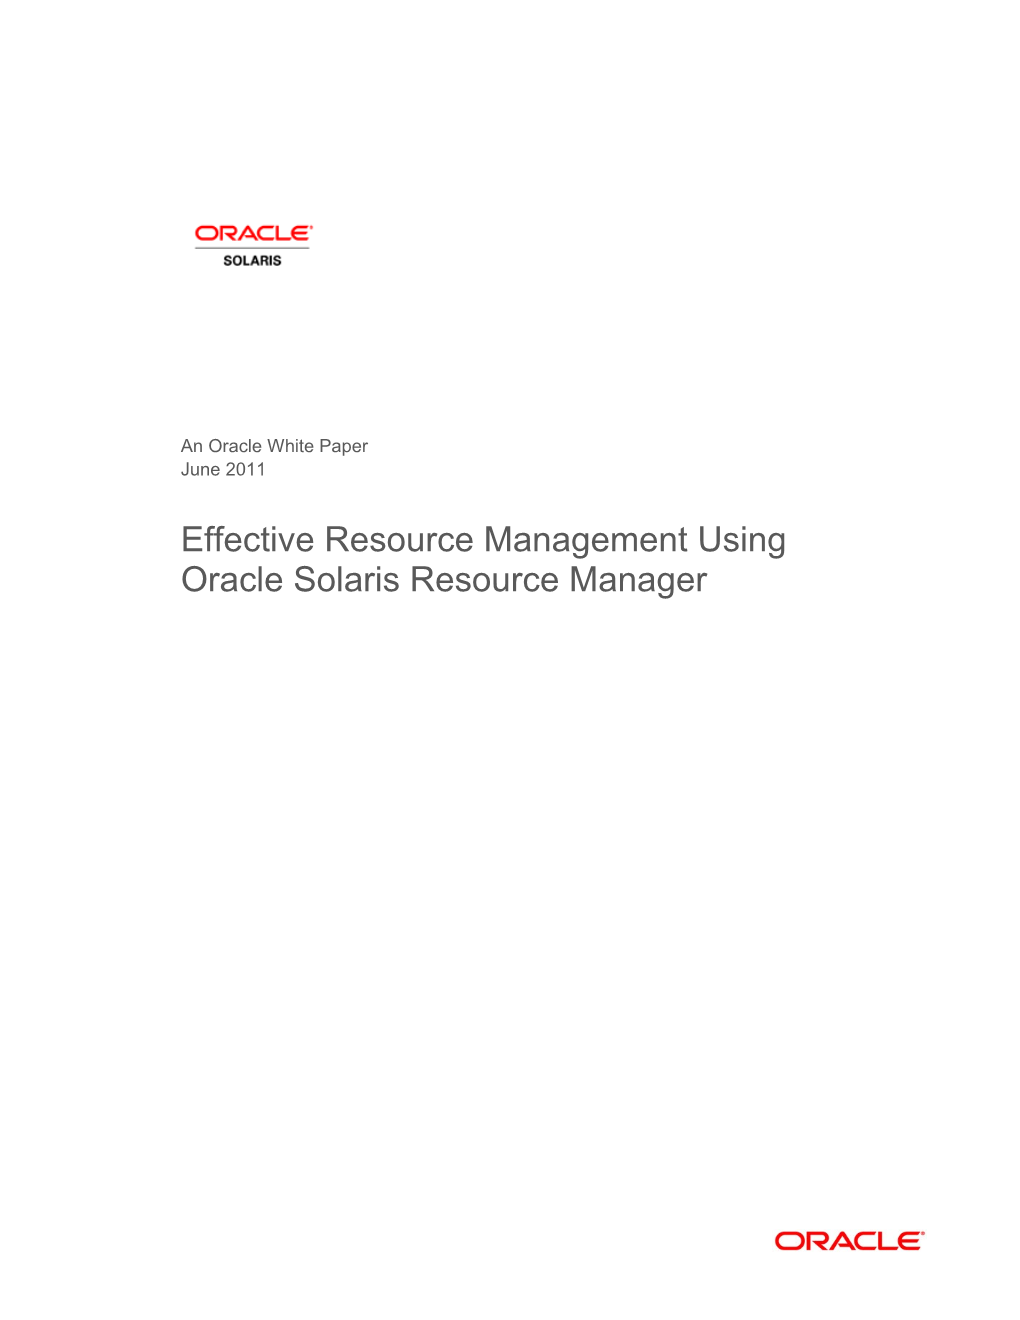 Effective Resource Management Using Oracle Solaris and Oracle